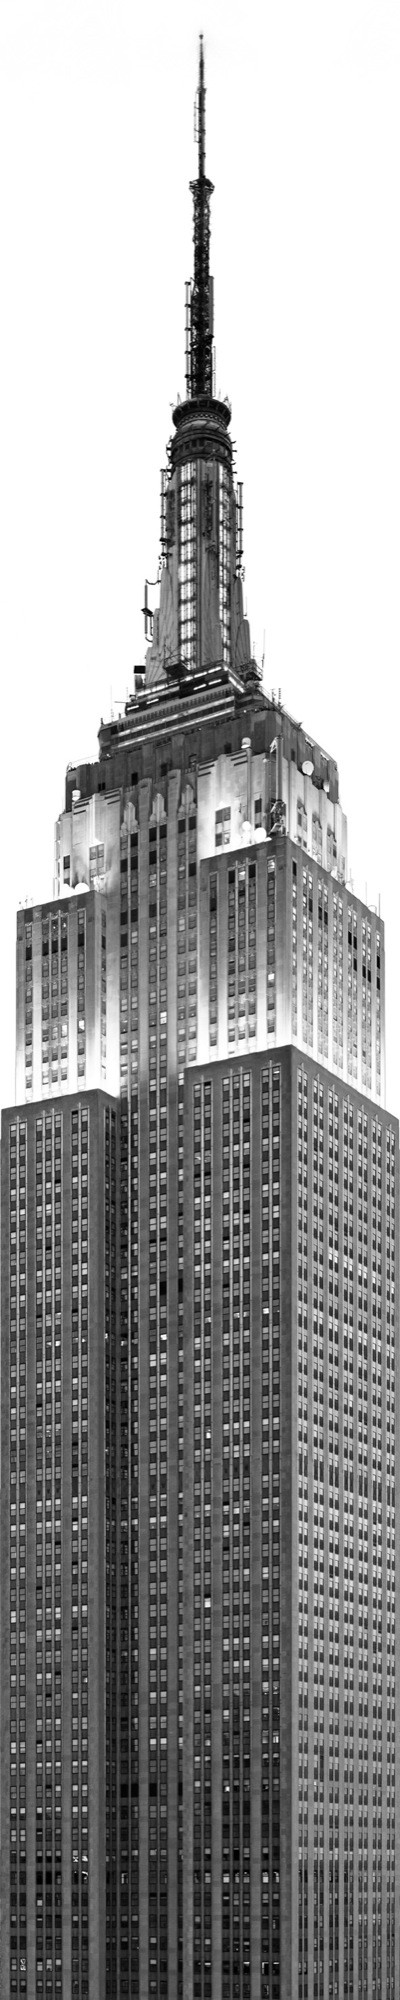 Panel „Empire State Building“ from Munich Design Book 